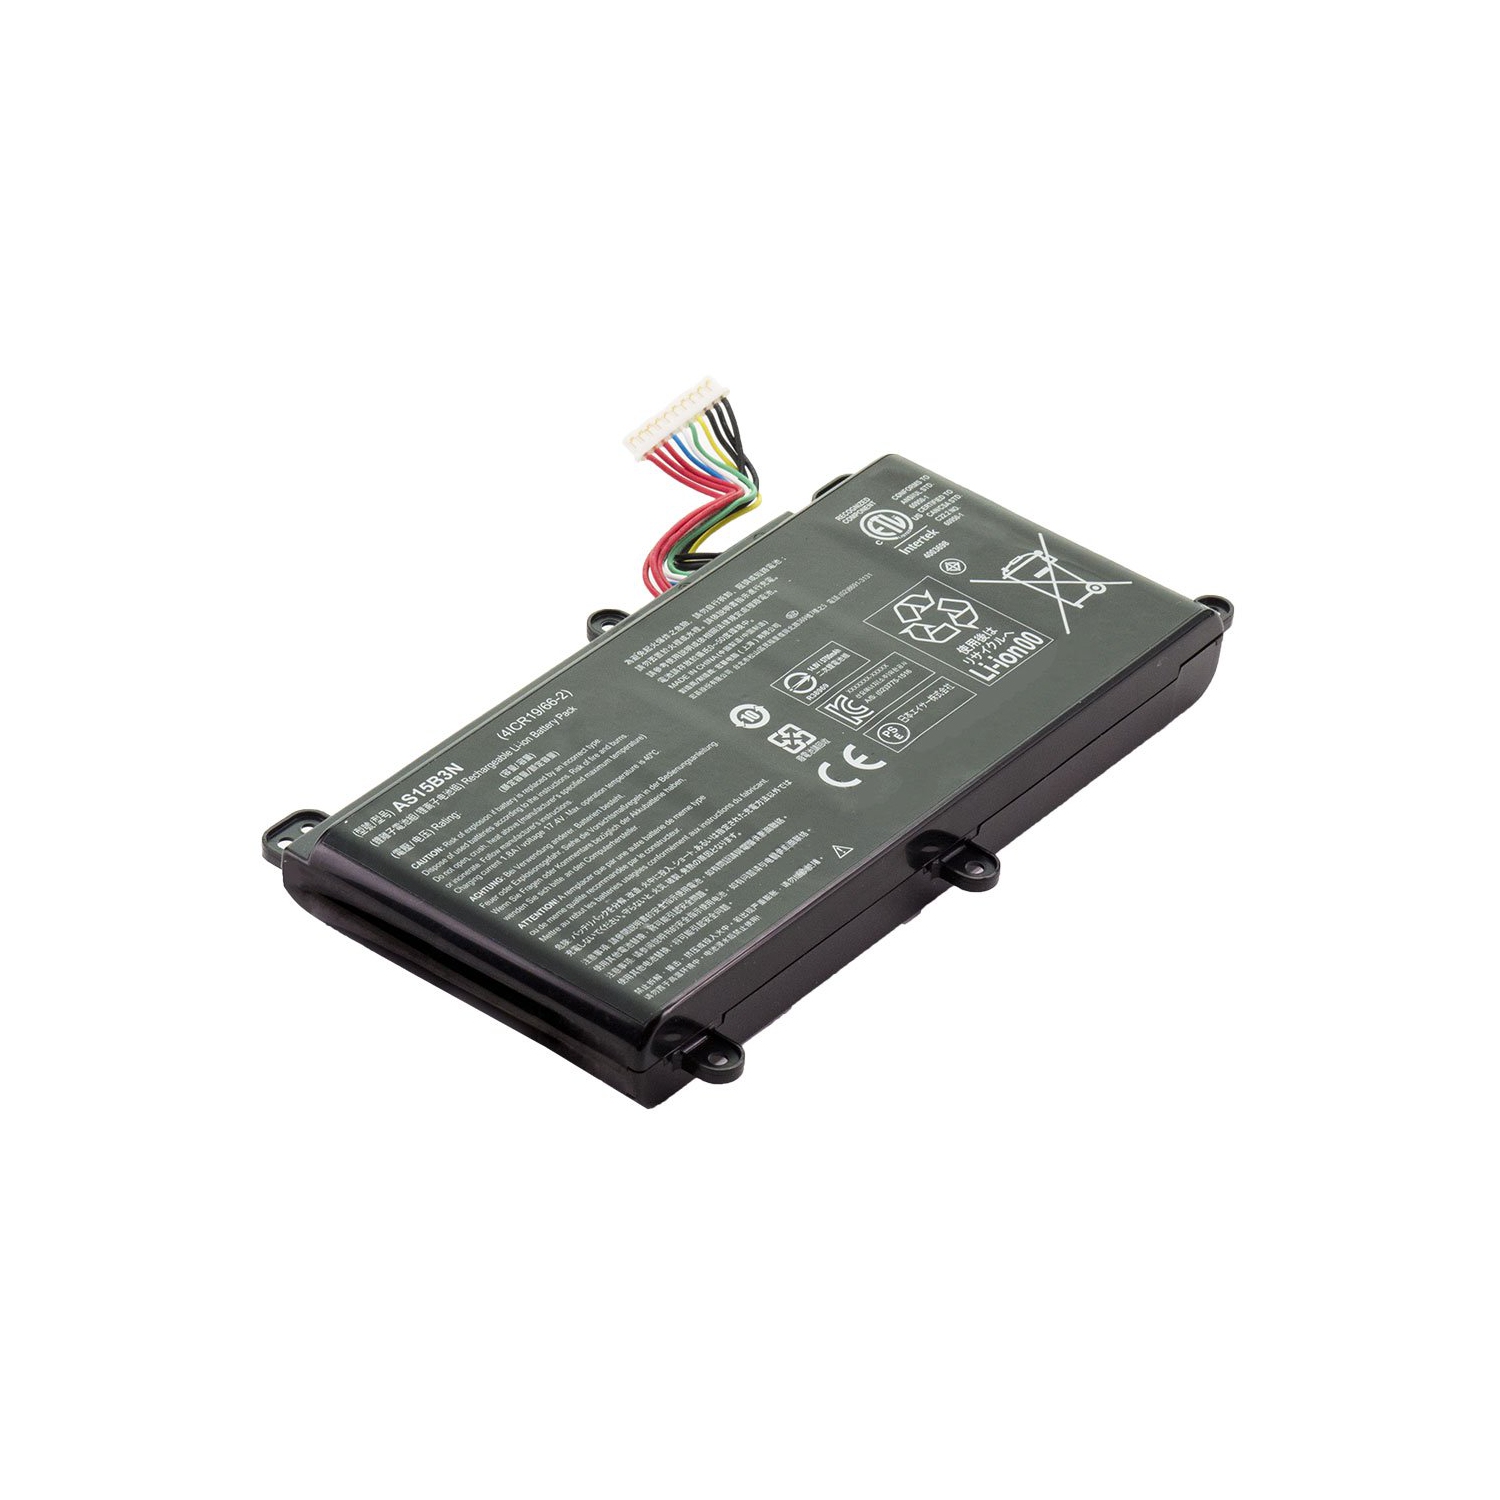 Laptop Battery Replacement for Acer Predator 15 G9-593-77WF, AS15B3N, KT.00803.004, KT.00803.005